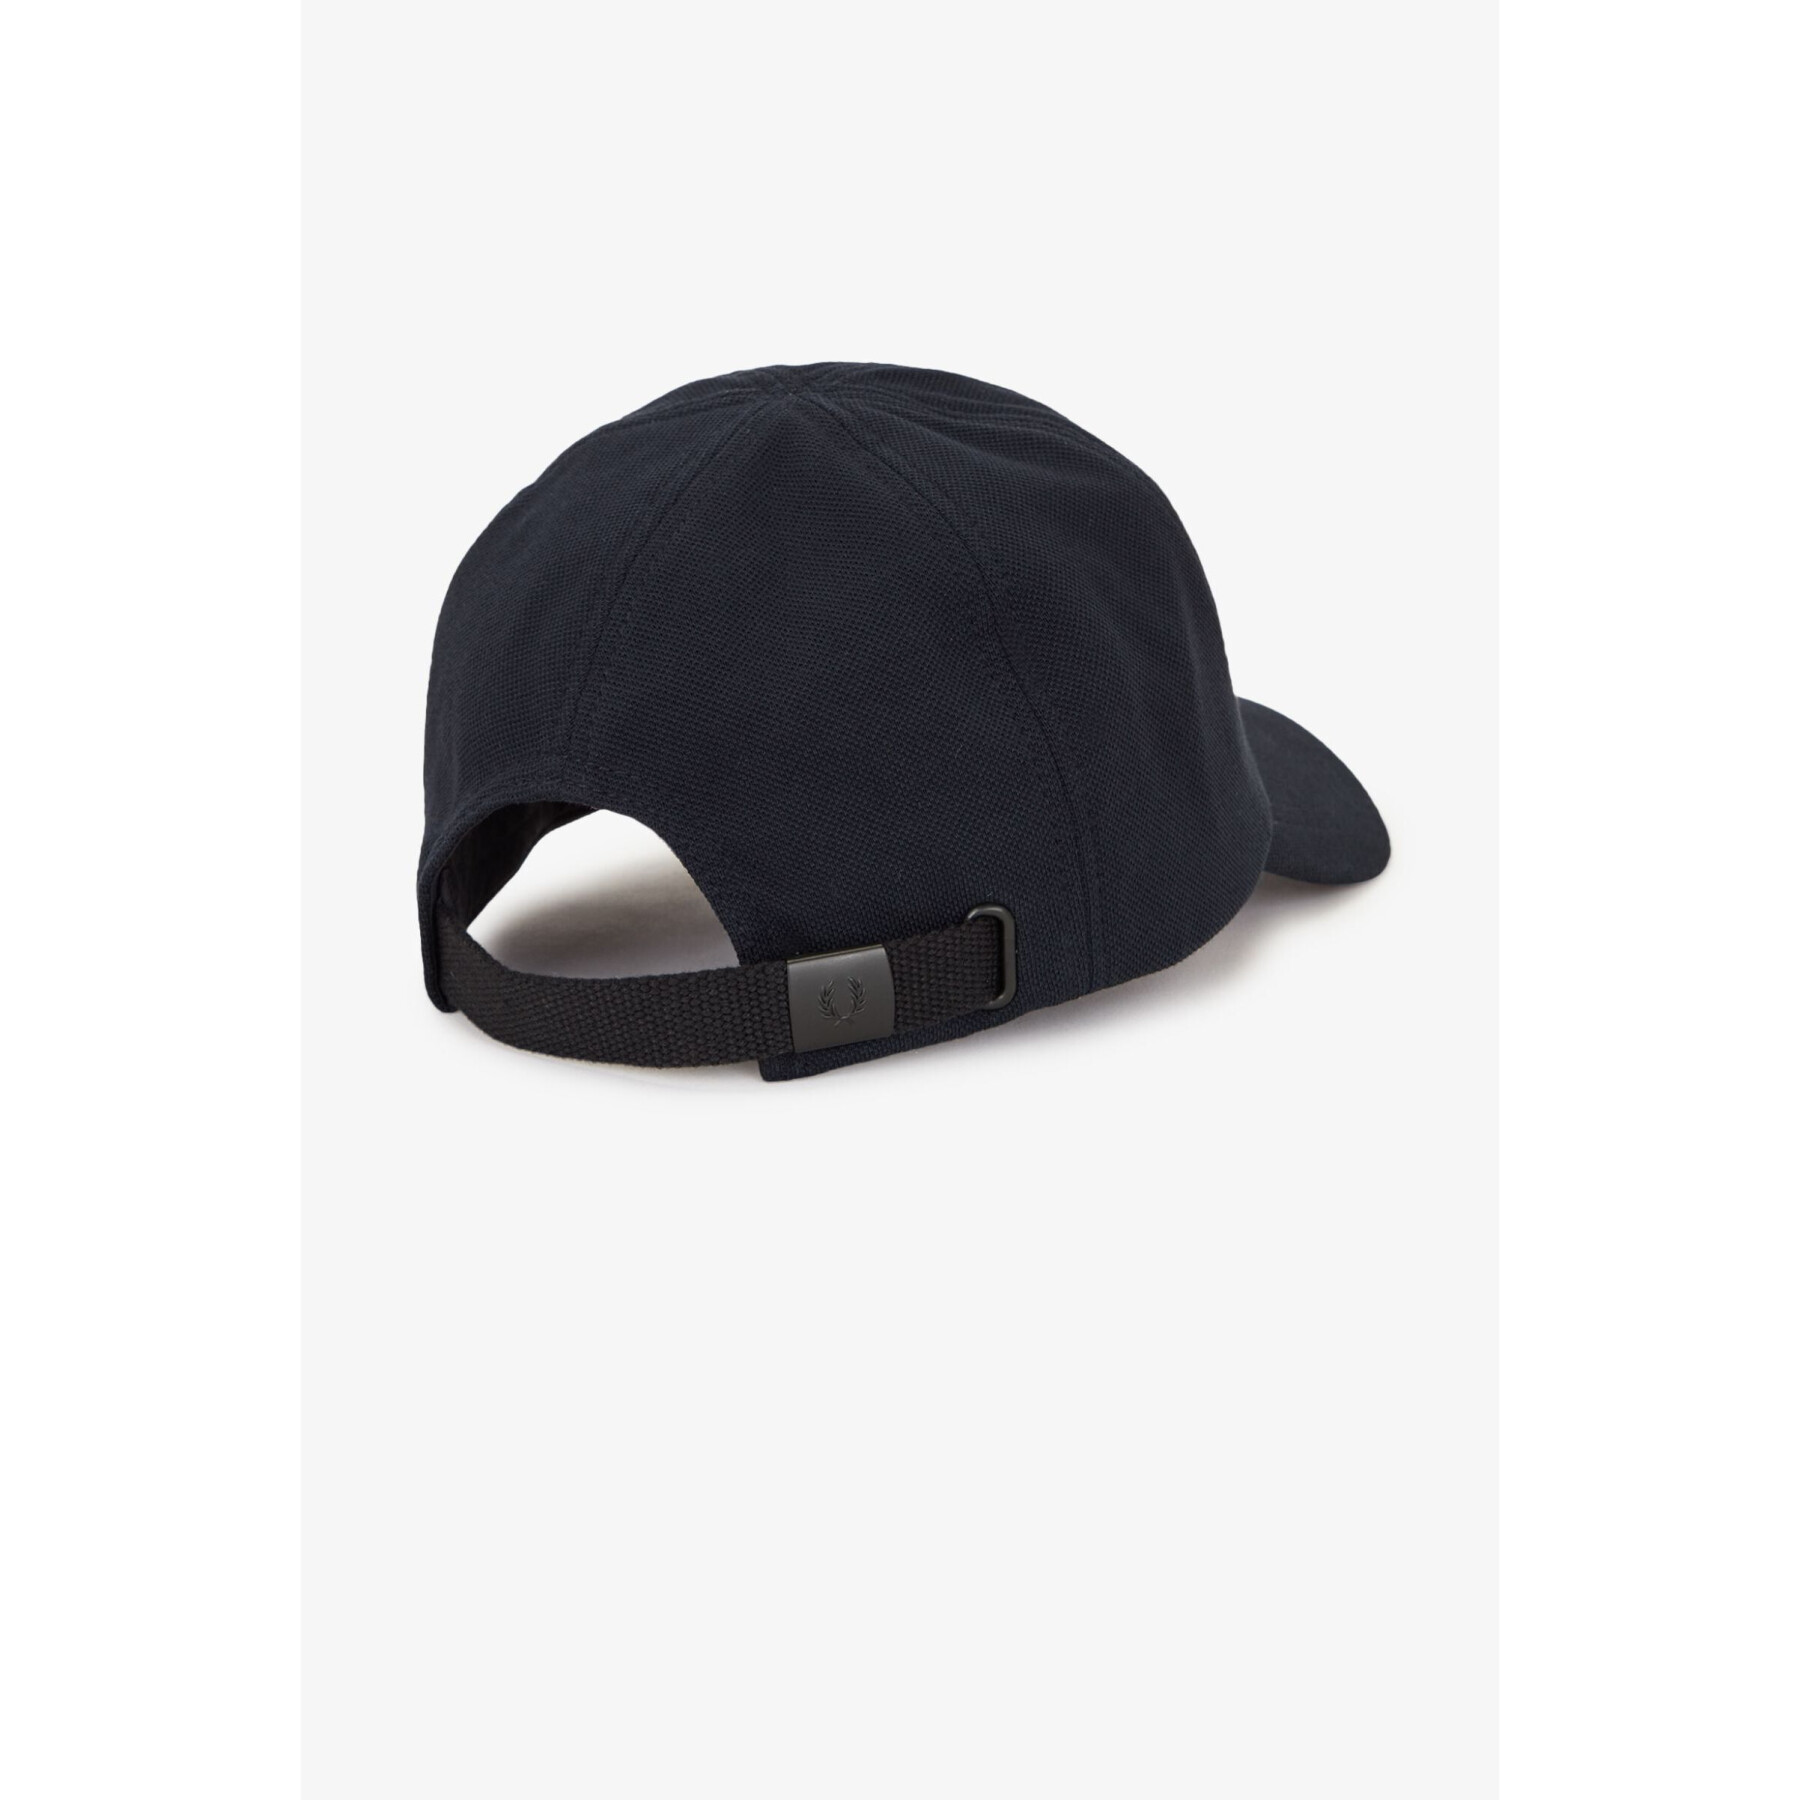 Baseball cap Fred Perry Pique Classic